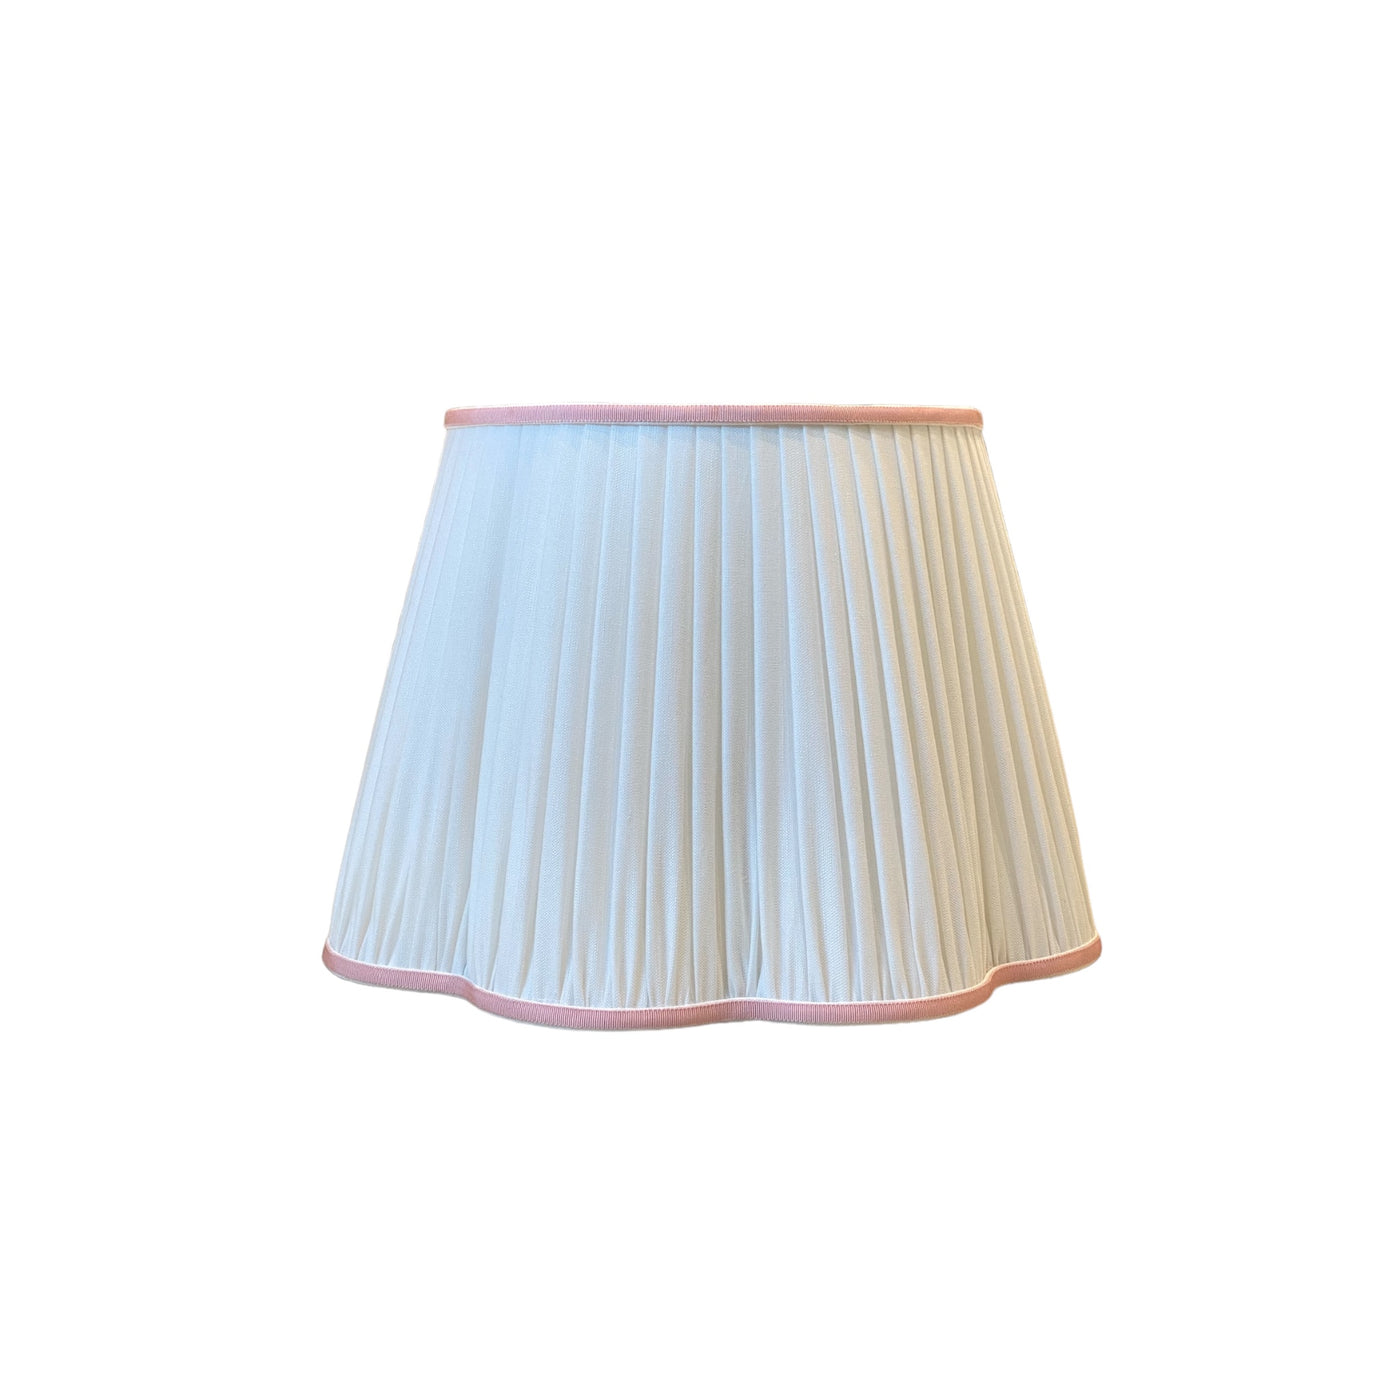 Scalloped linen lampshade with pink trim